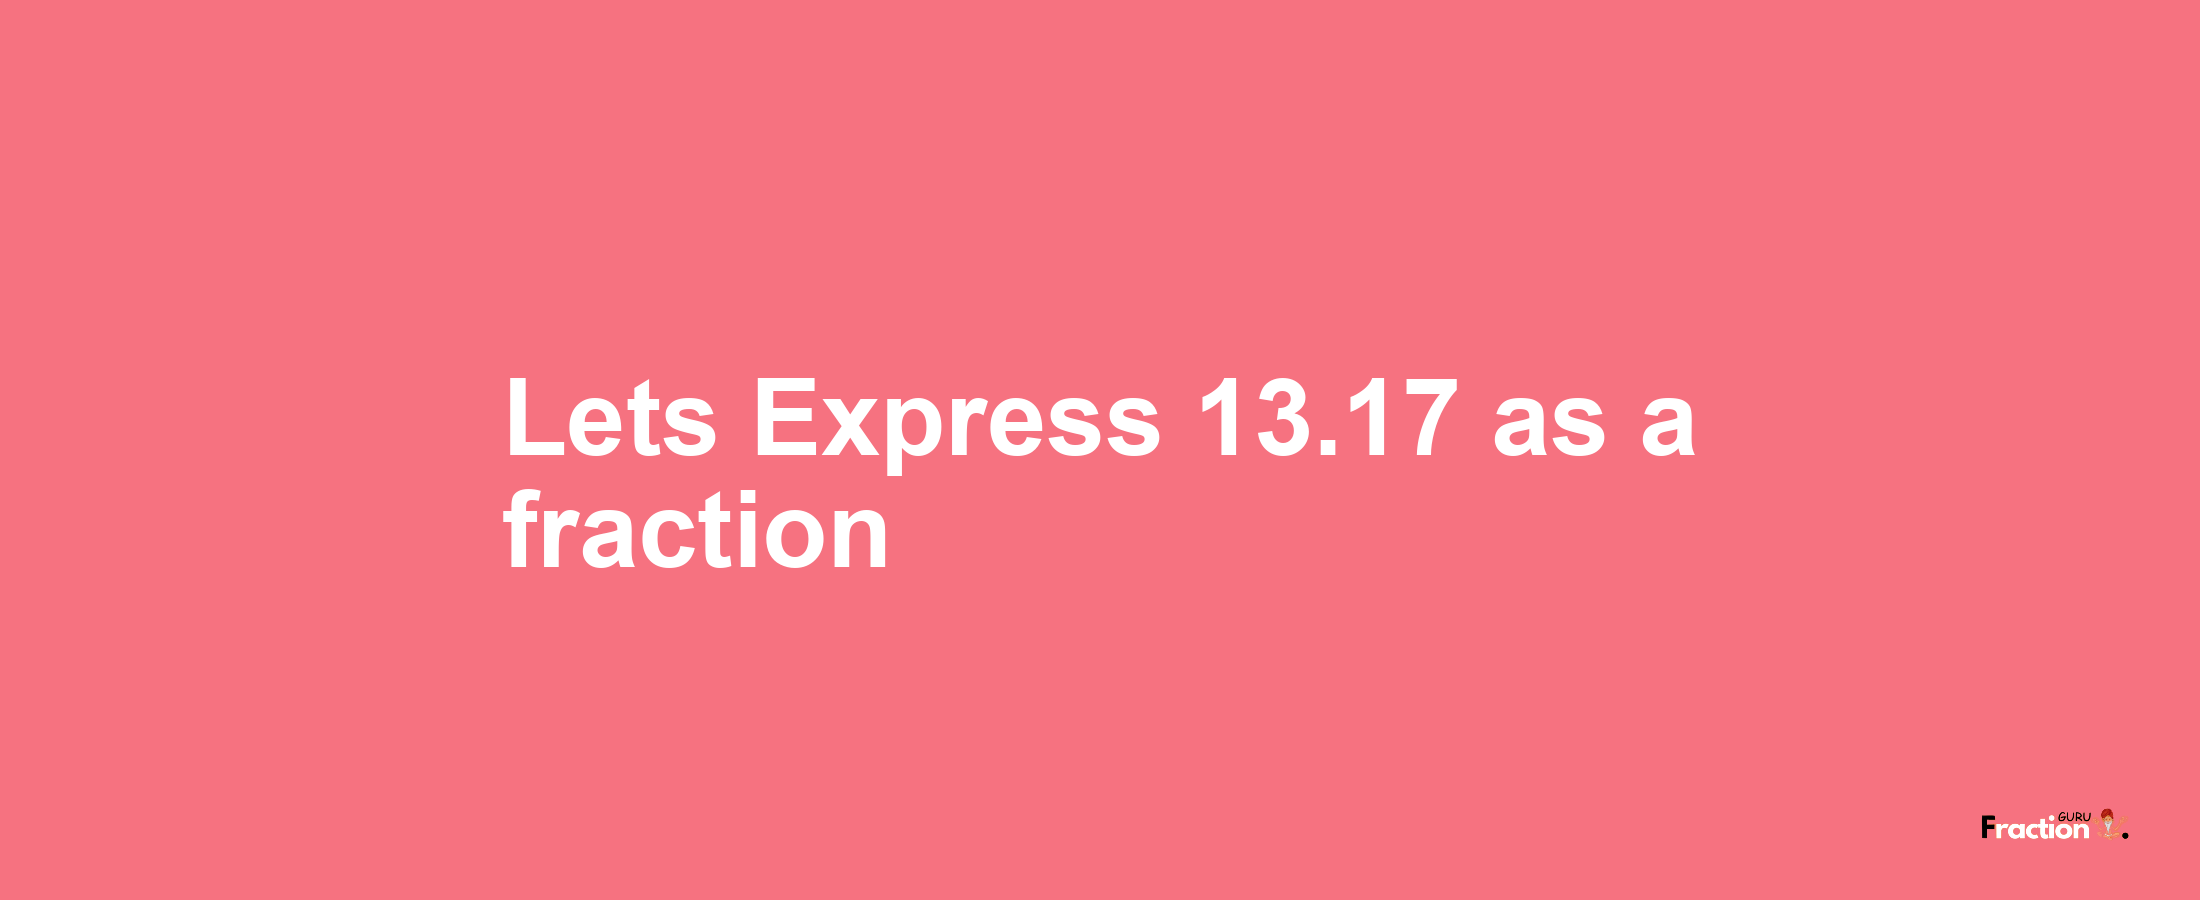 Lets Express 13.17 as afraction